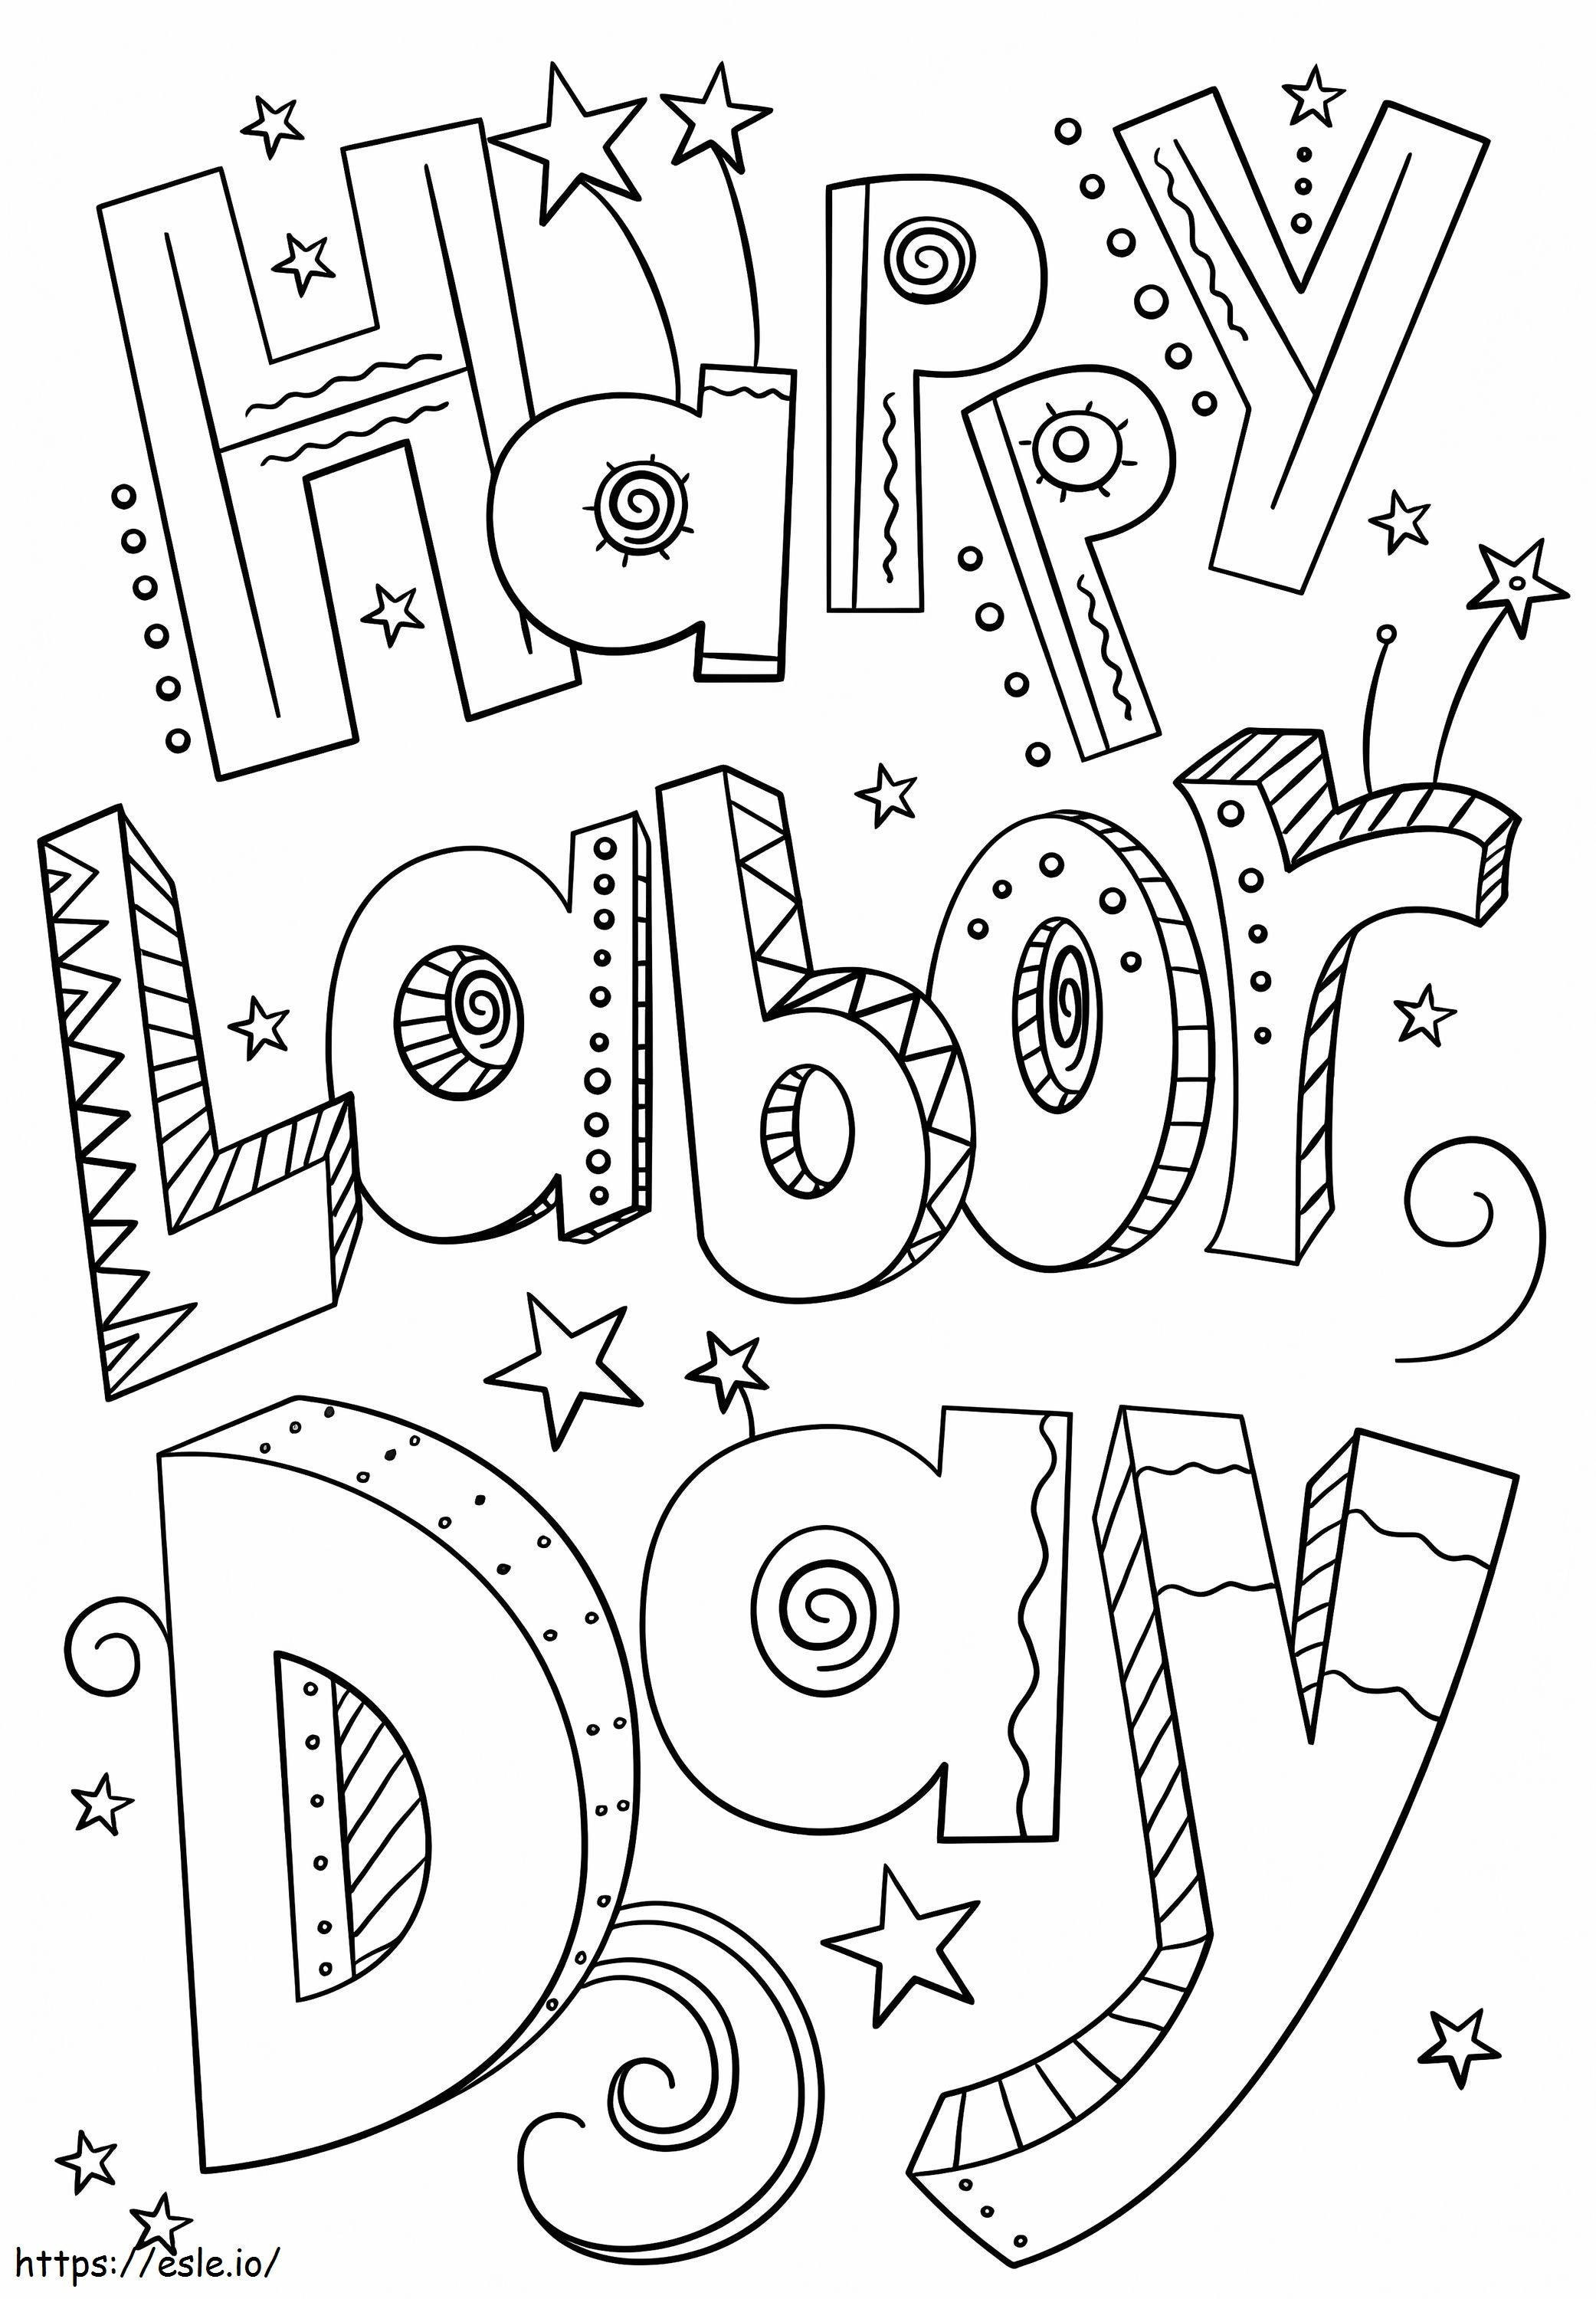 Happy Labor Day coloring page